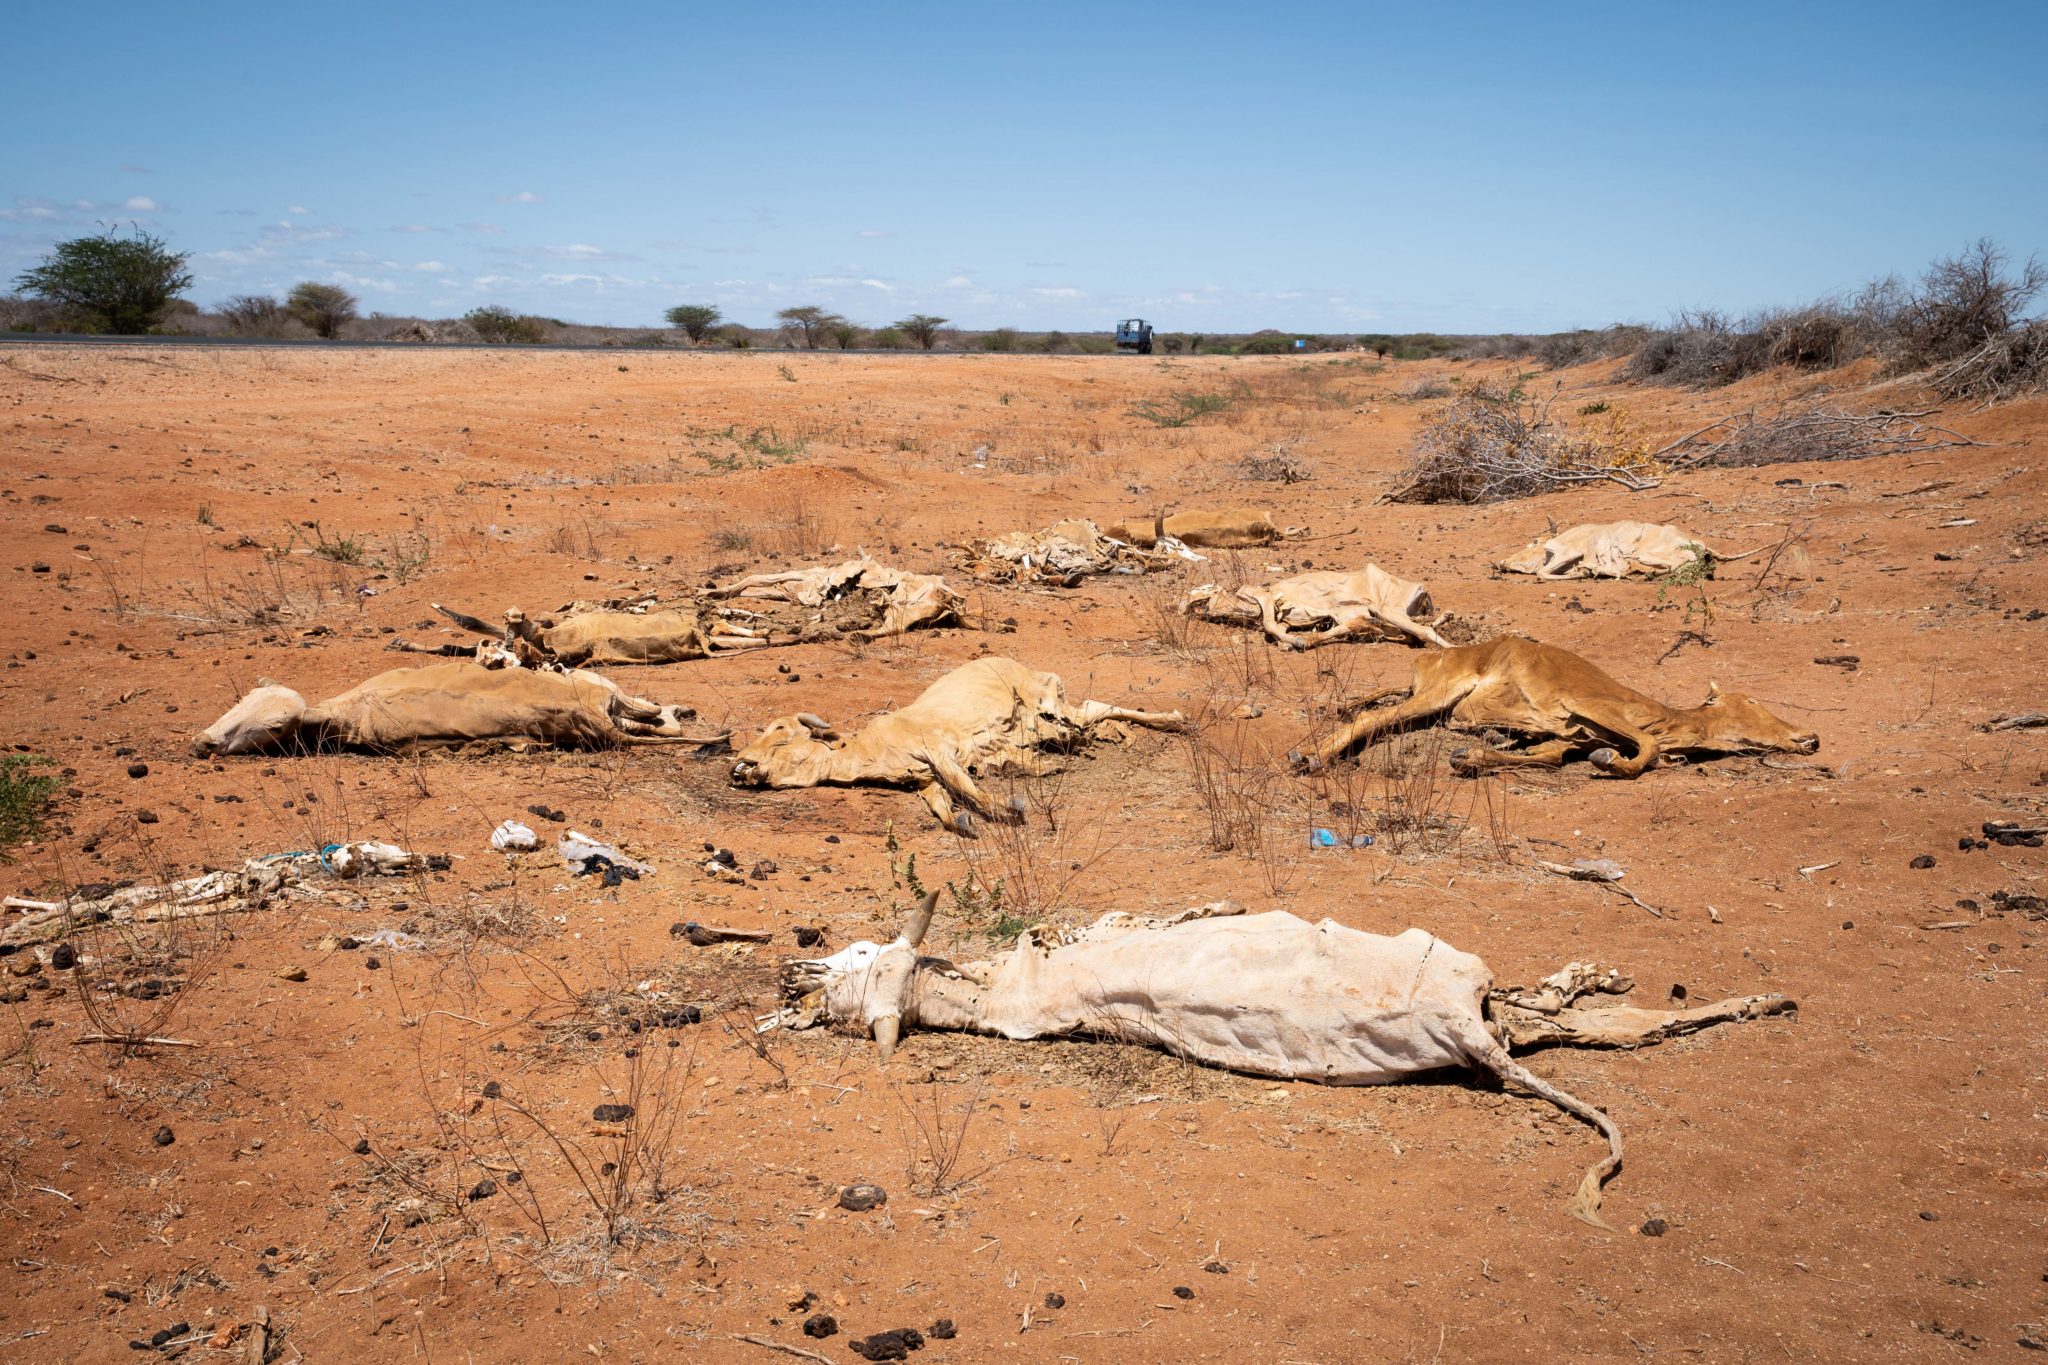 Cattle carcasses lie by the side of the road around 35km south of Garissa, in Tana River County, Kenya, 02-07-22. Image: Lisa Murray/Concern Worldwide.